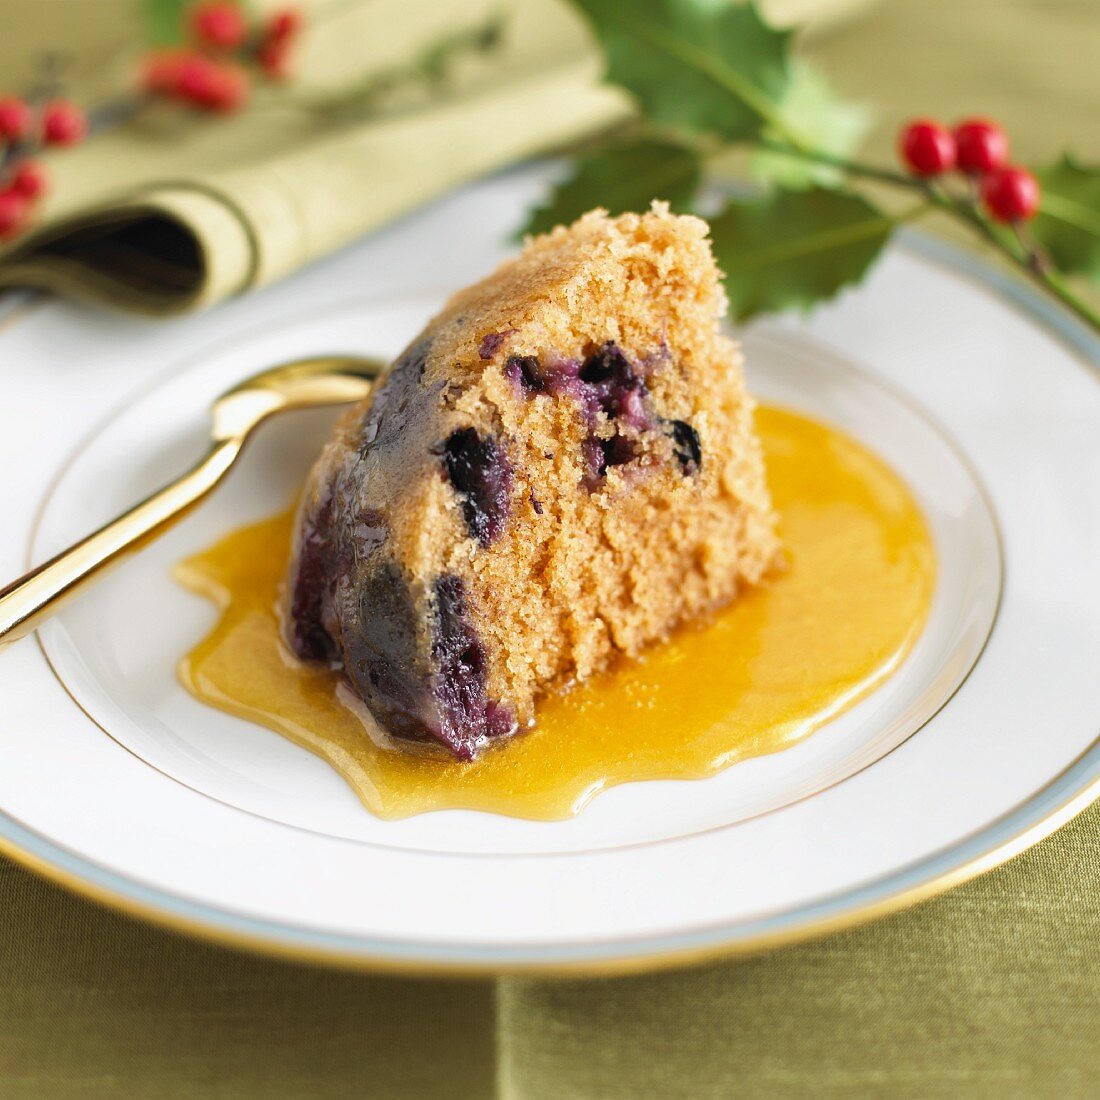 A piece of blueberry pudding with honey sauce